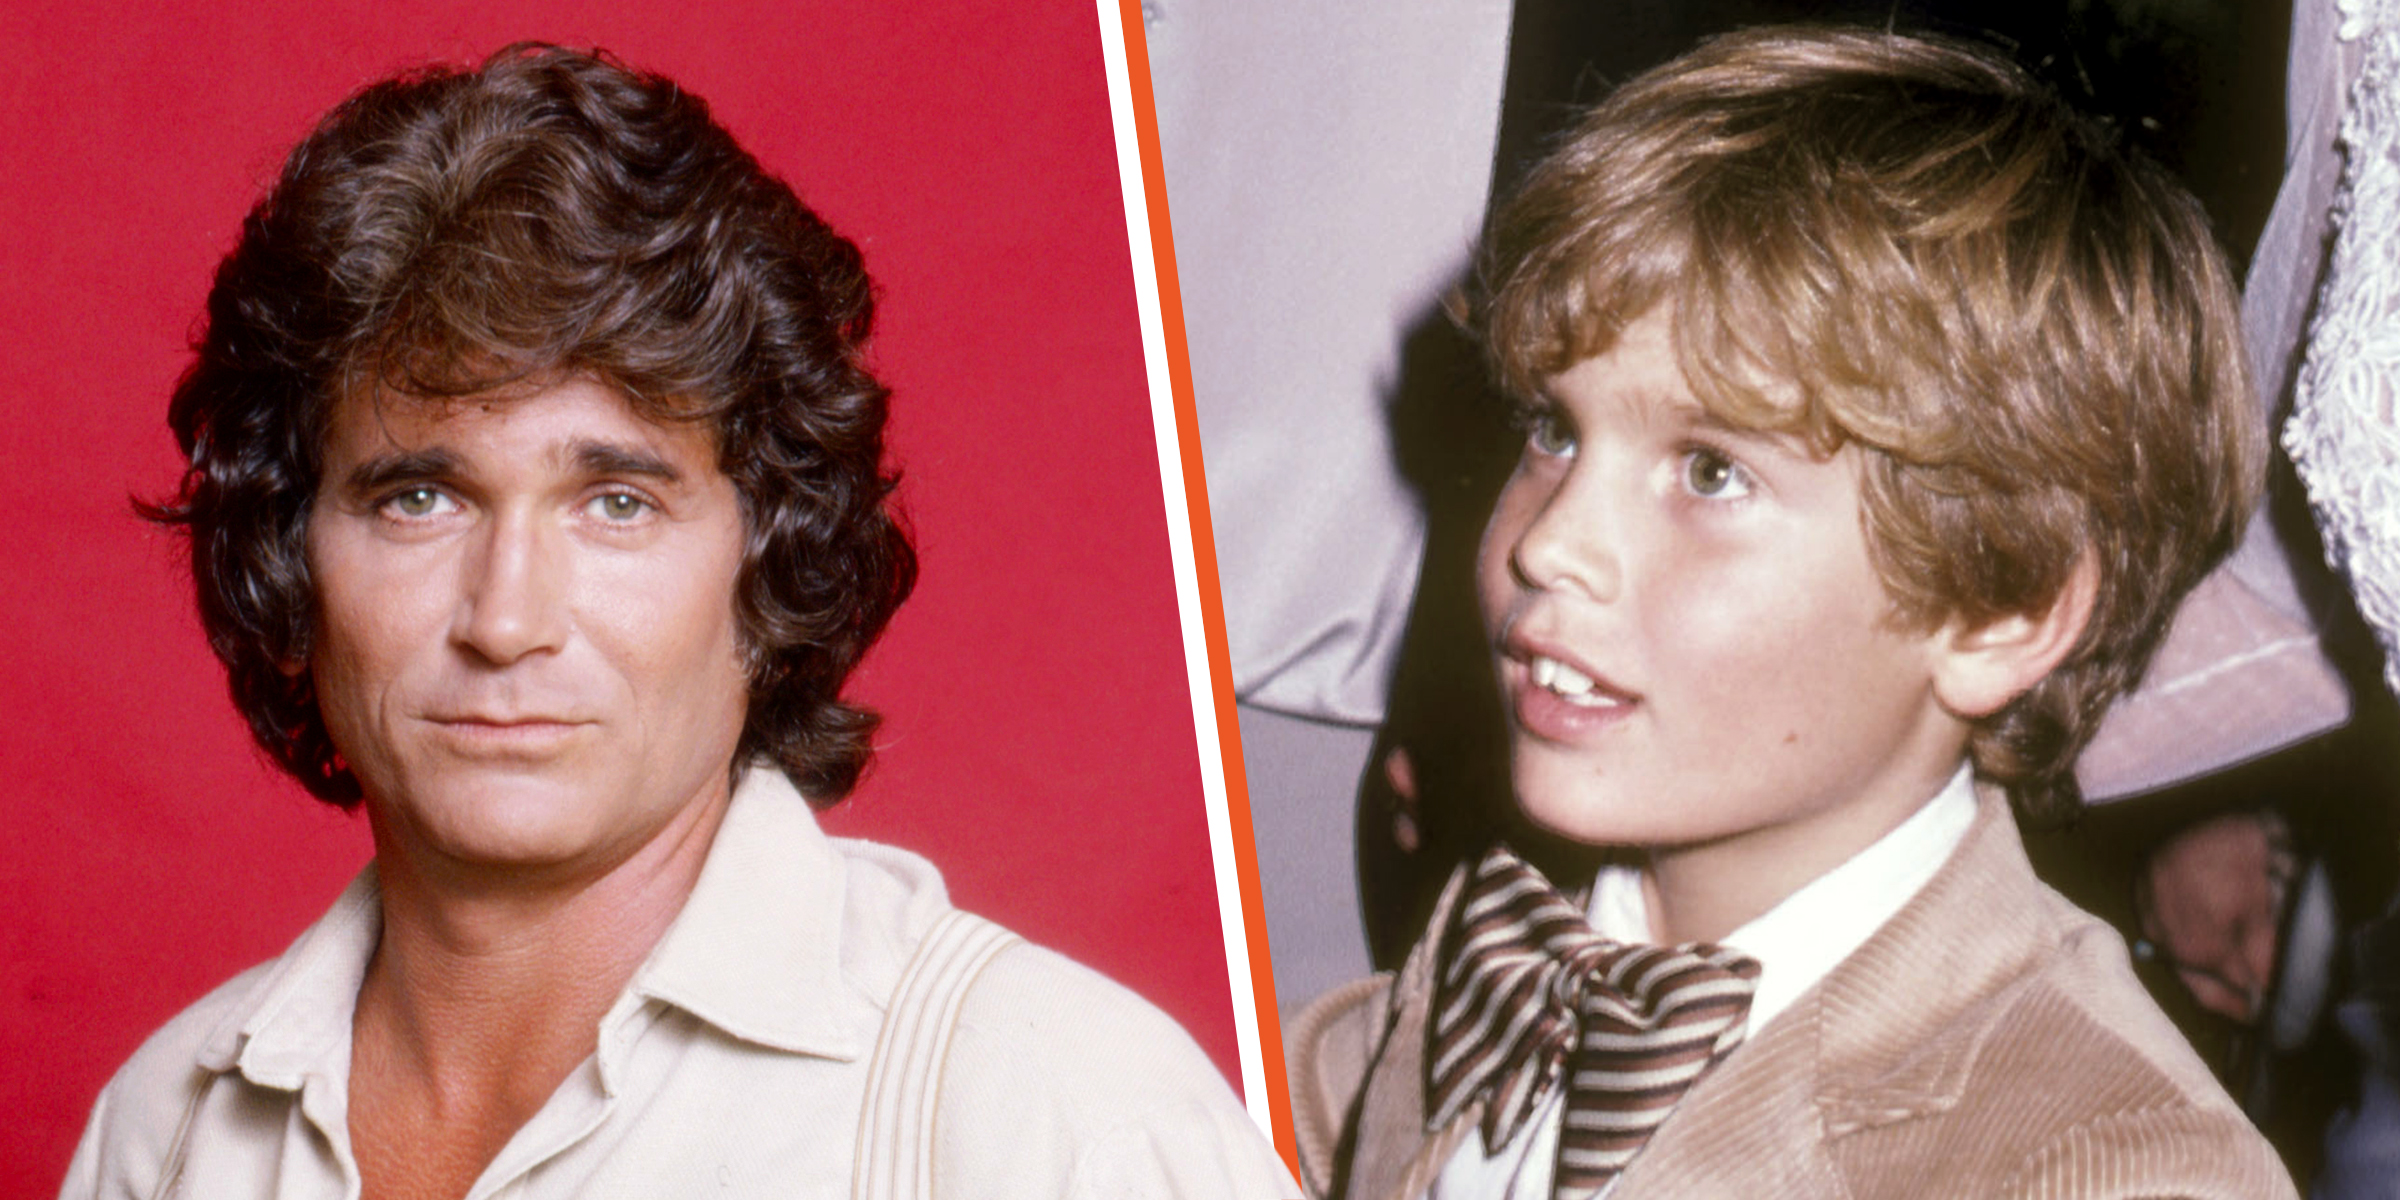 Michael Landon’s Gay Son Shows Lookalike Kids After ‘Painful’ Childhood & Losing Dad at 16